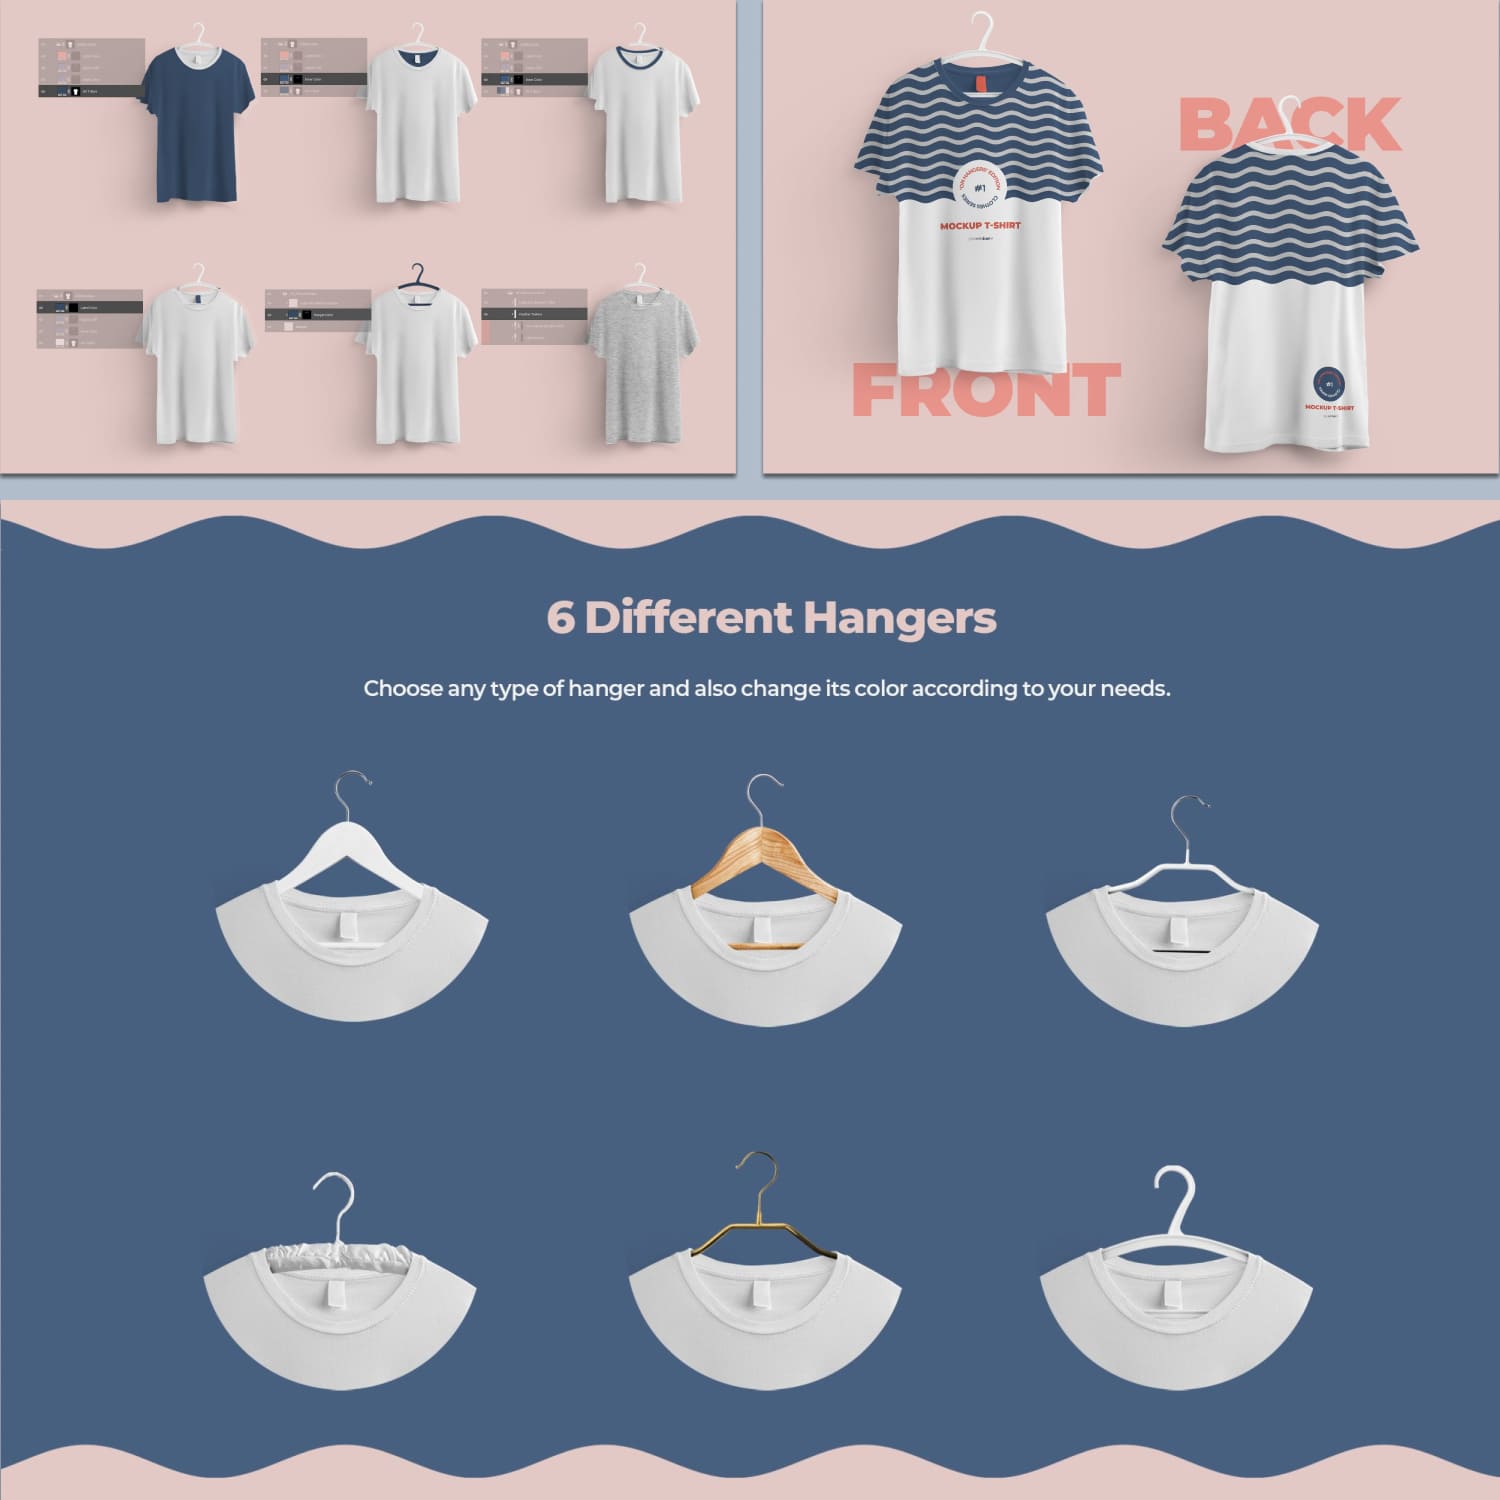 Front and Back T-shirts Mockups With 6 Different Hangers cover.